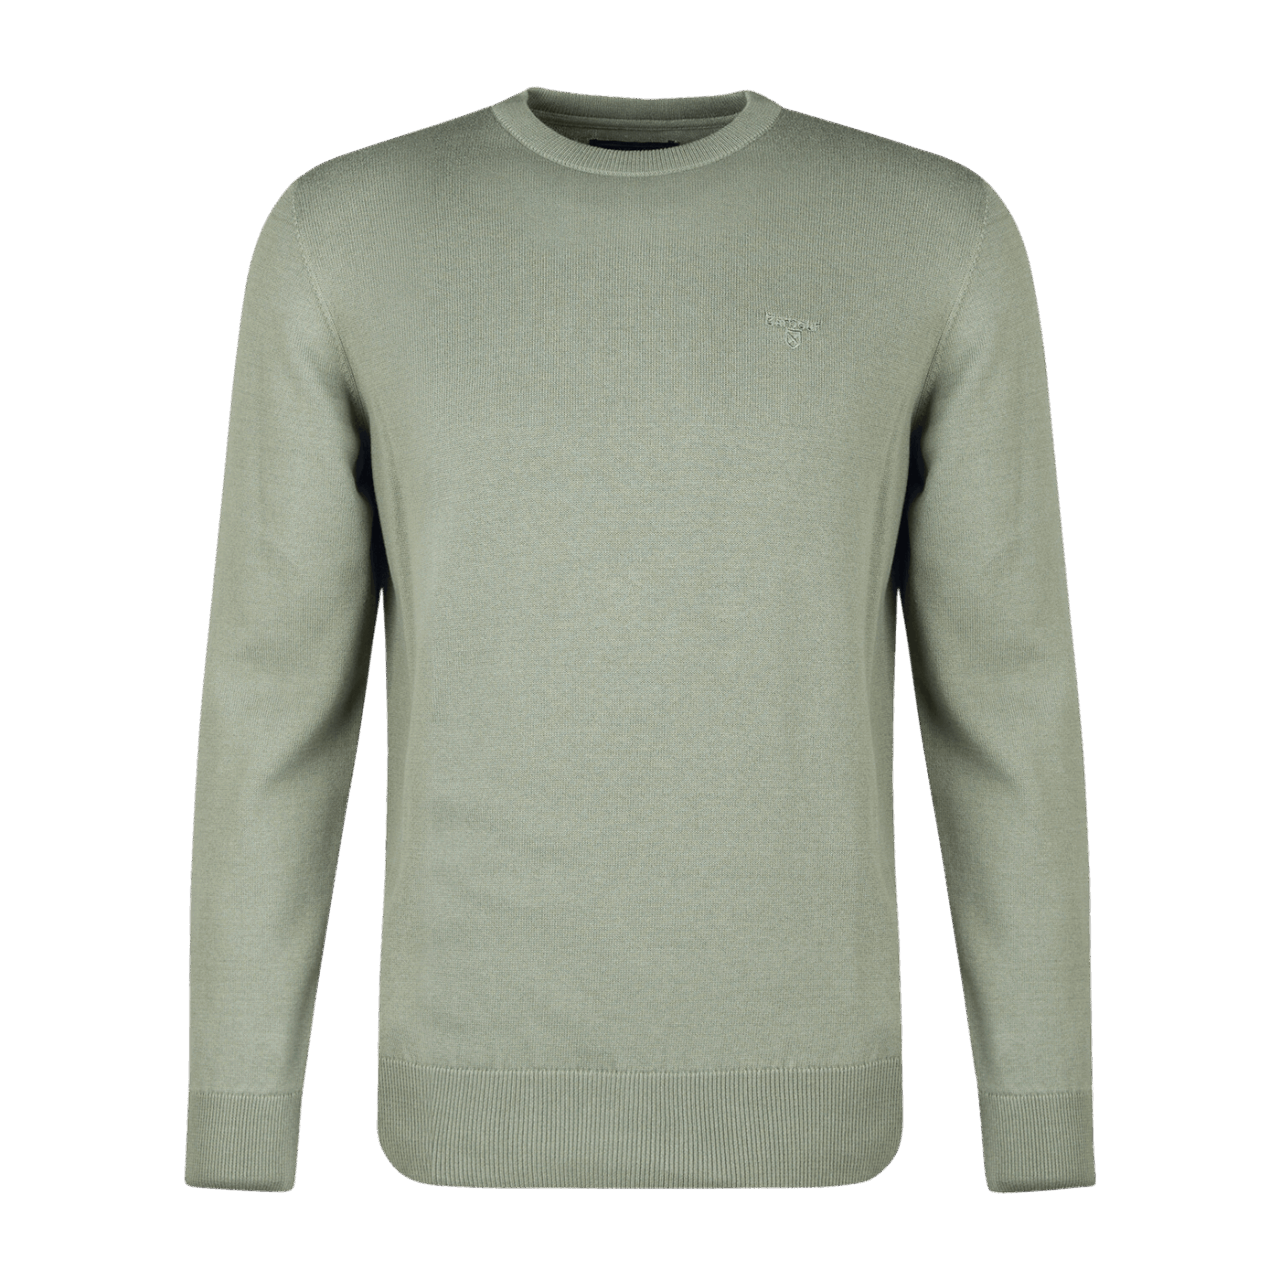 Barbour Pima Cotton Crew Neck Sweater - agave green